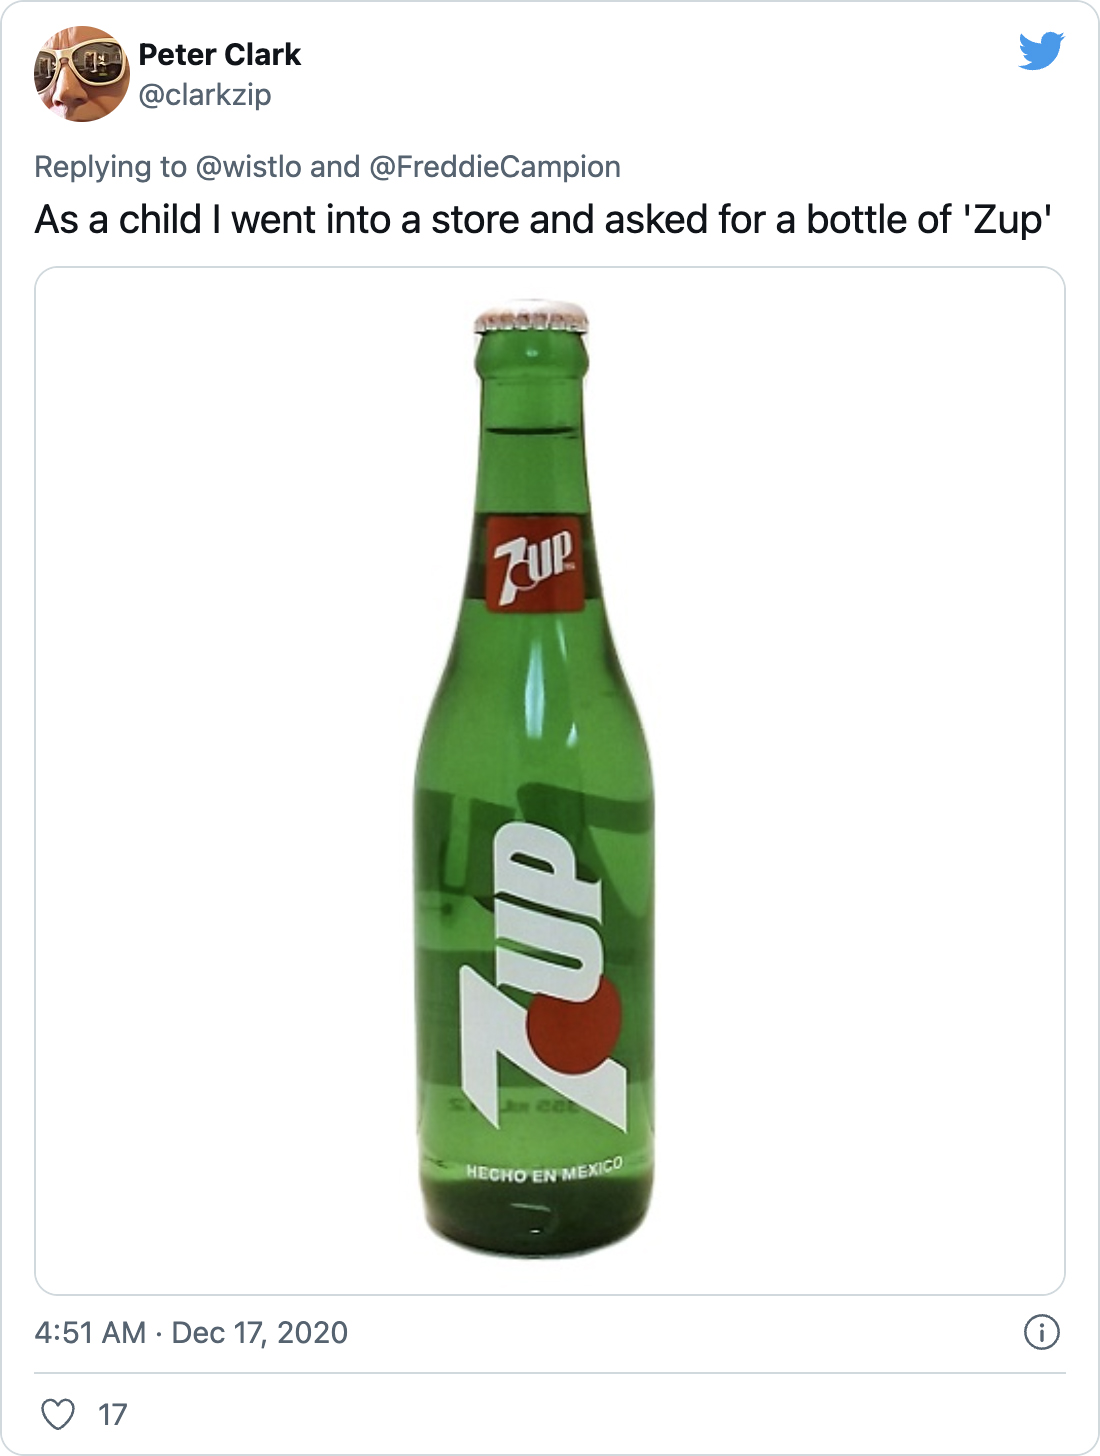 As a child I went into a store and asked for a bottle of 'Zup' - @clarkzip